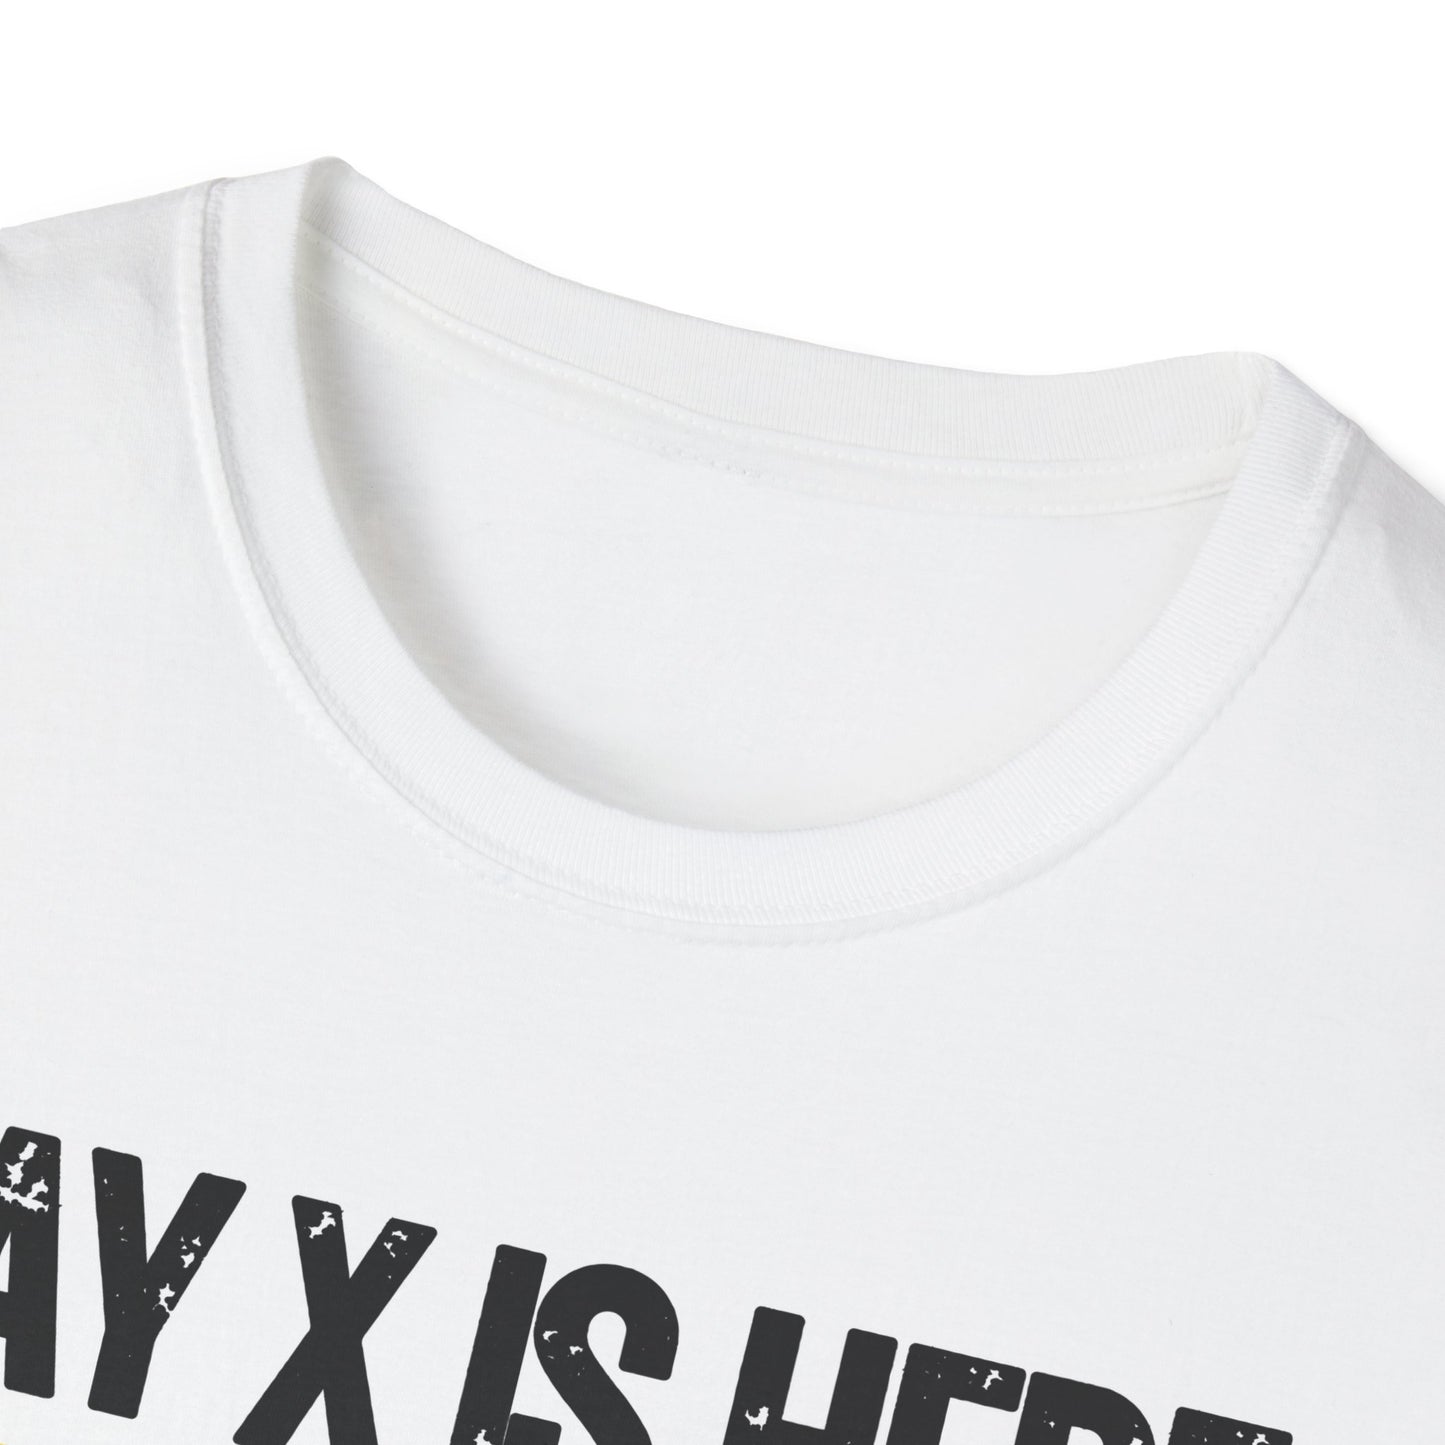 (UK) DAY X IS HERE Unisex Softstyle T-Shirt